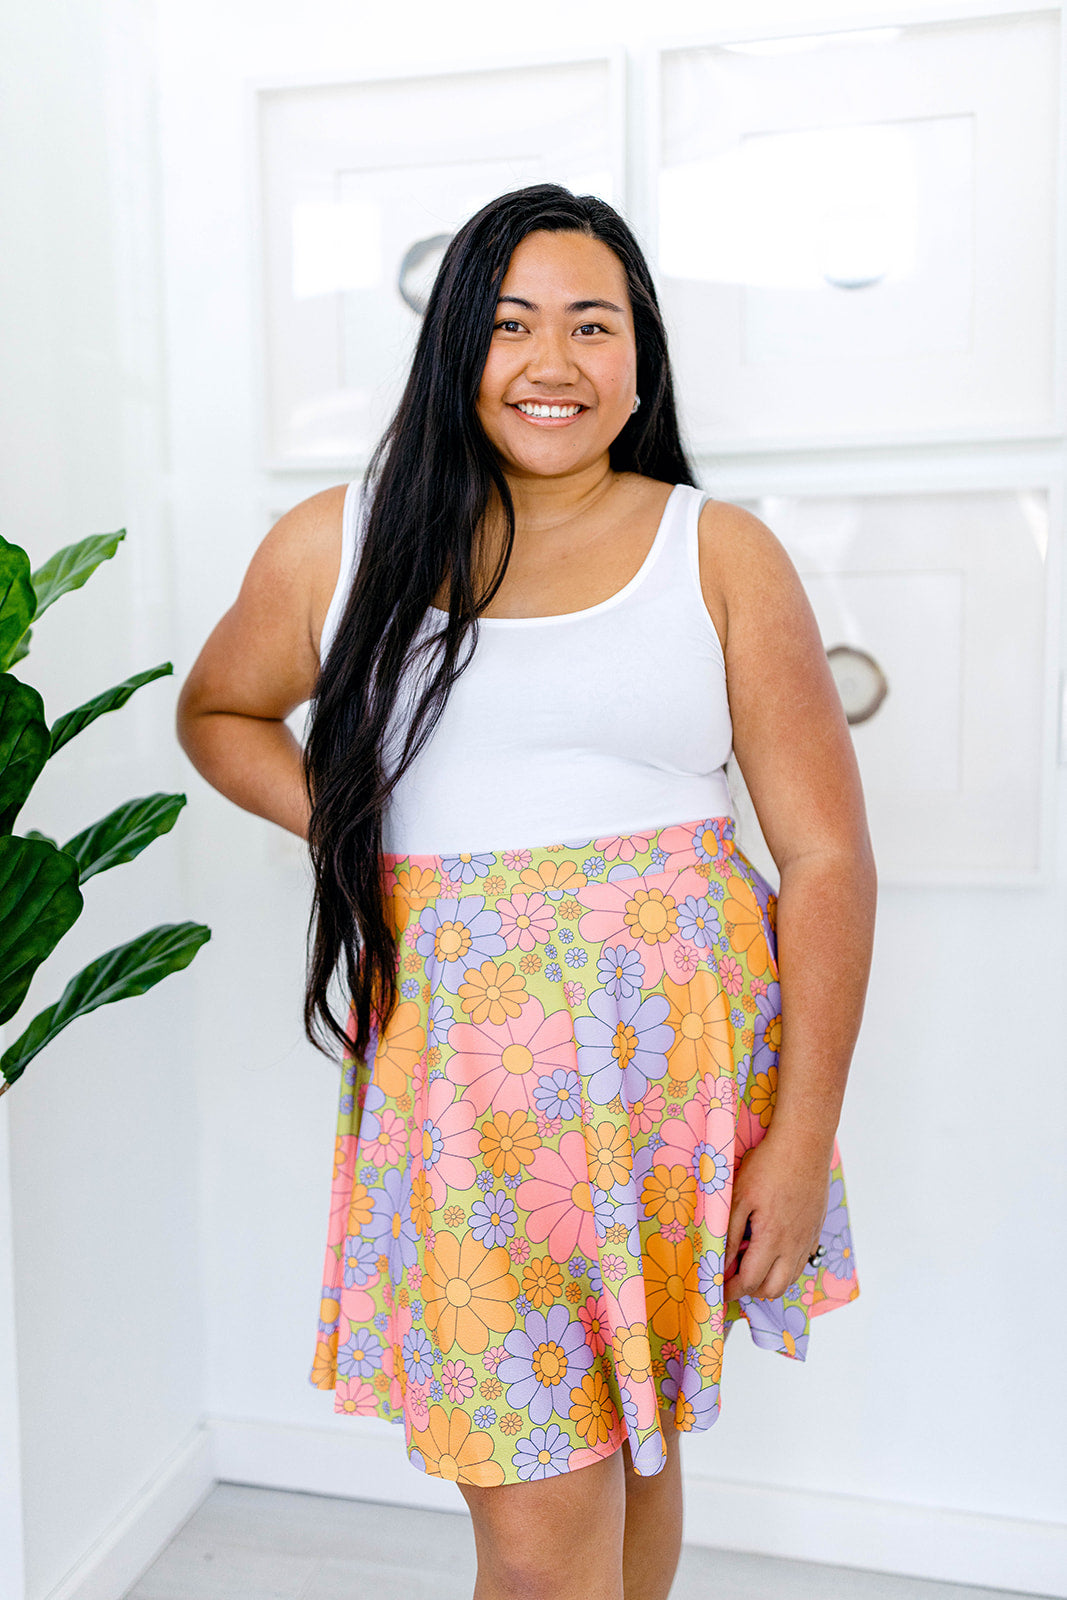 Get Your Groove On Skirt In Sizes XS-5X!***